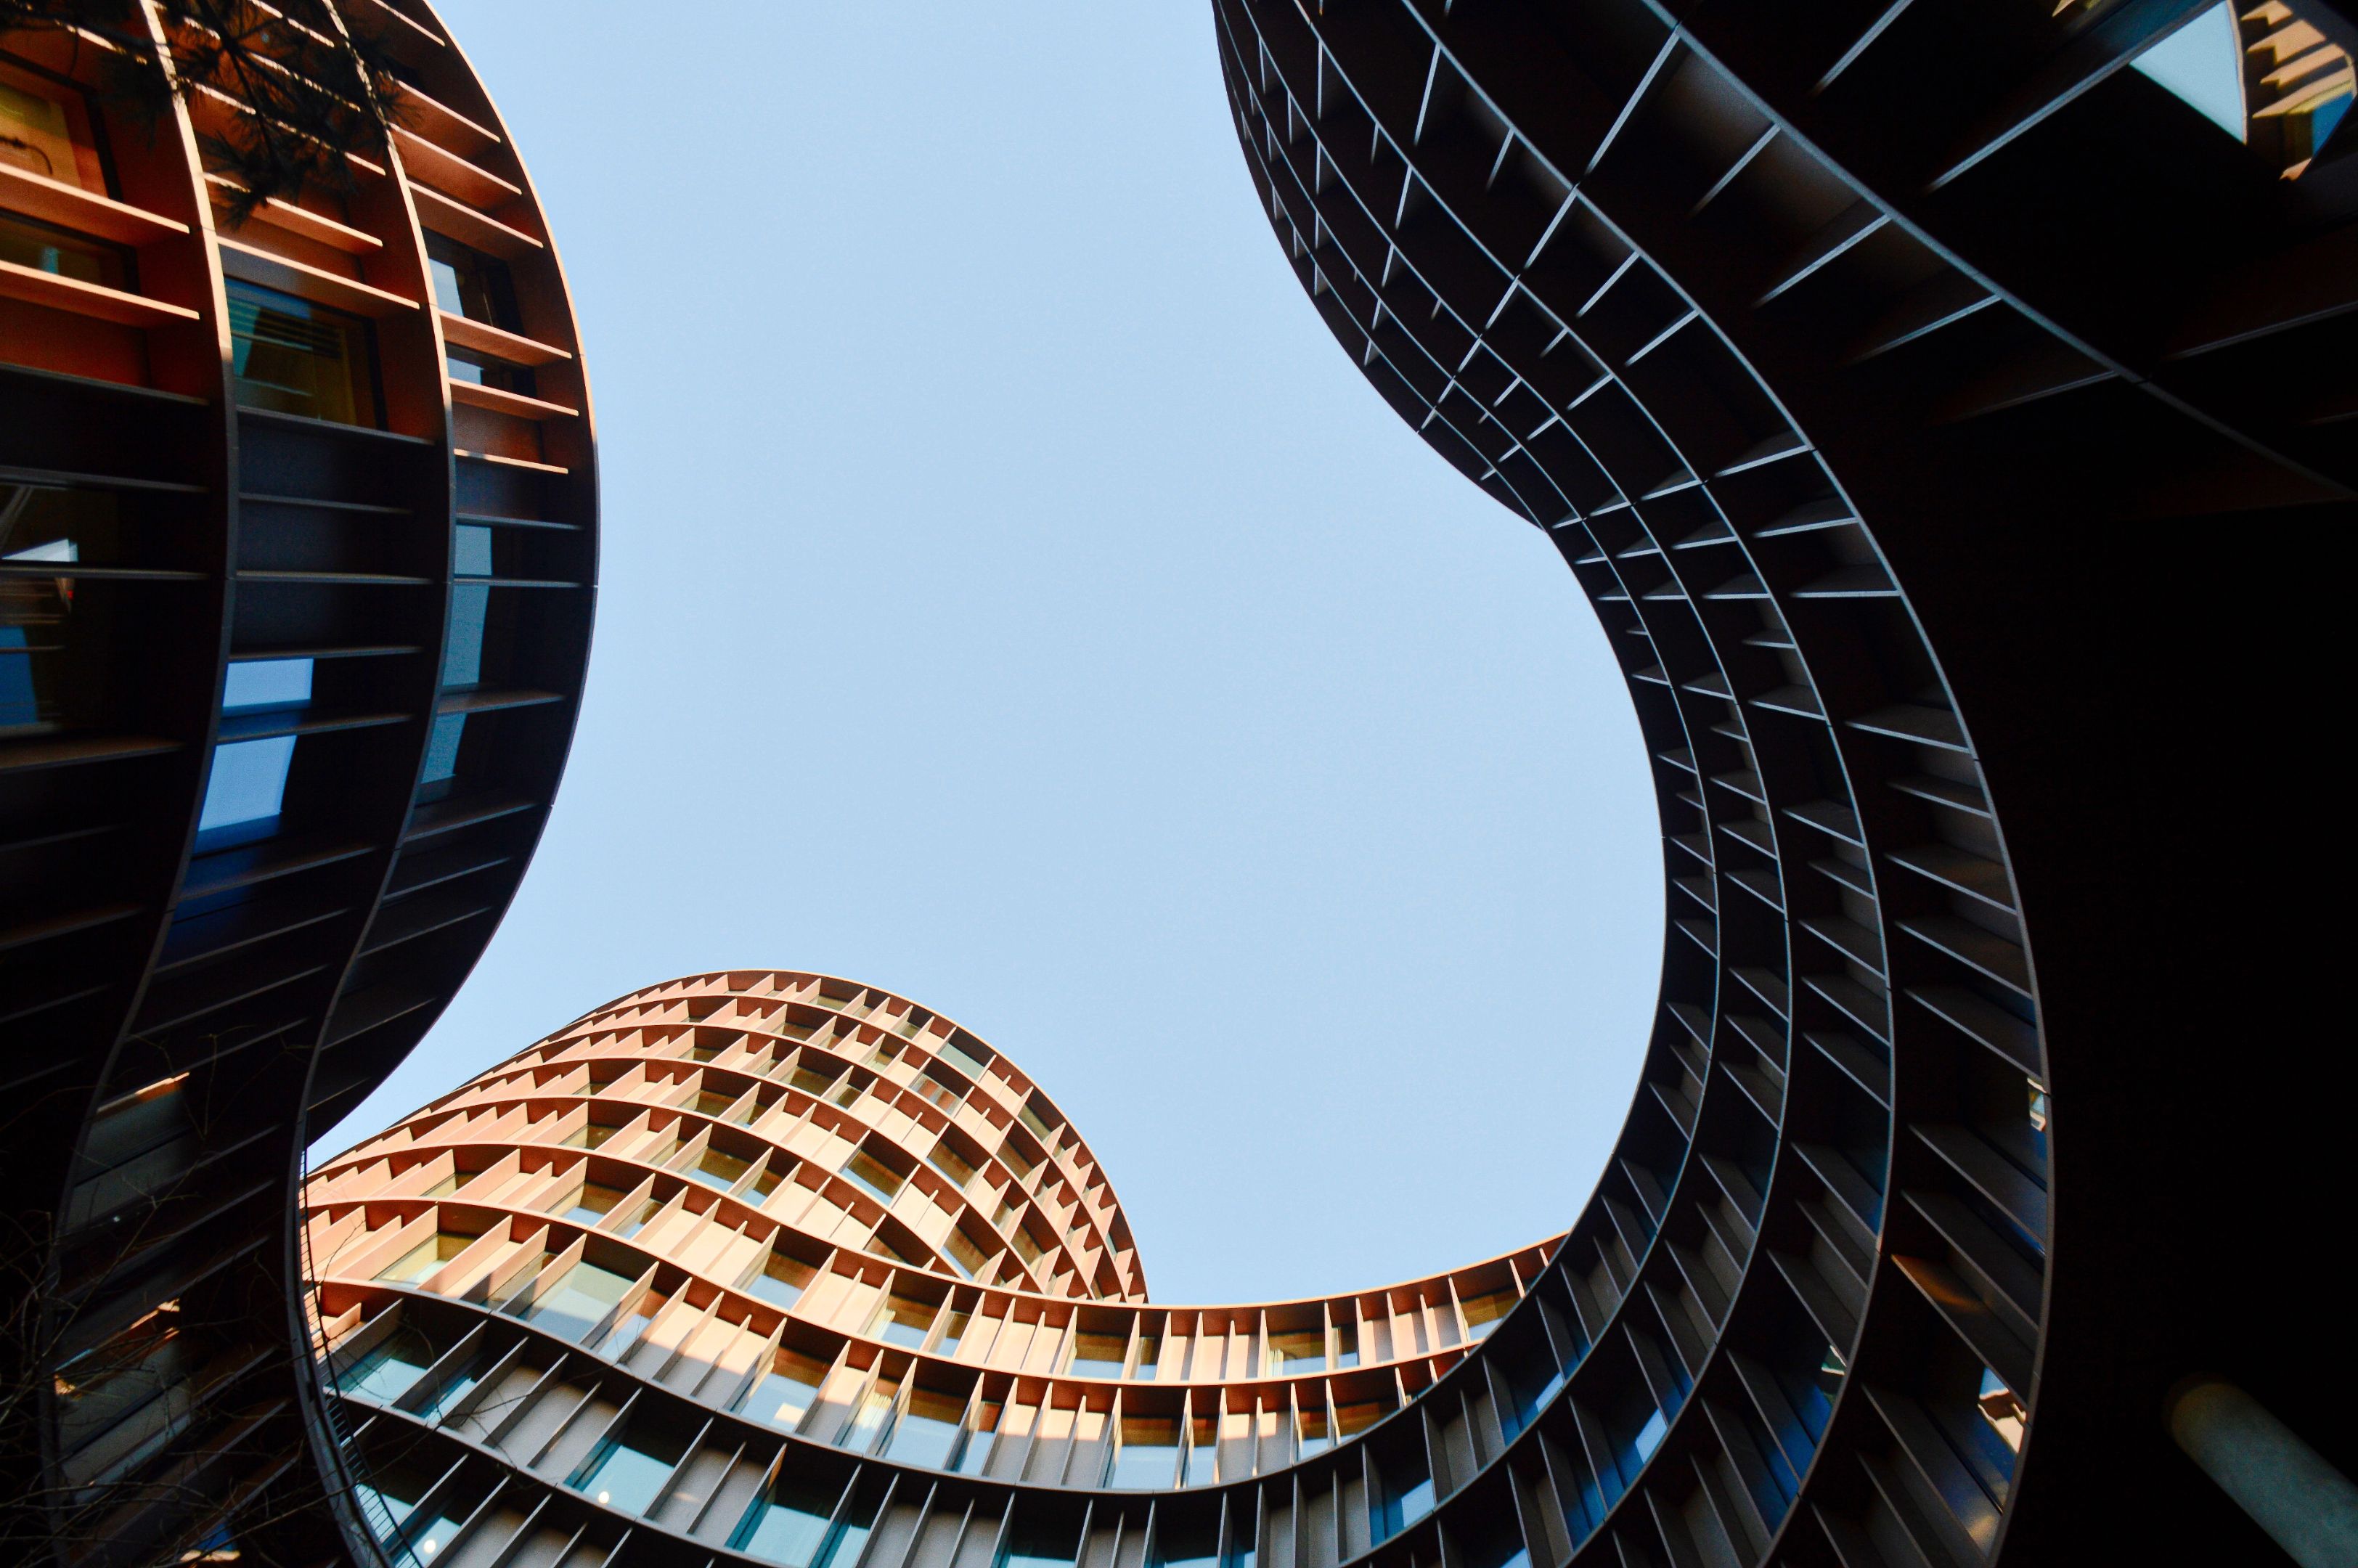 Image of the architecture of Axel Towers building in Copenhagen Denmark